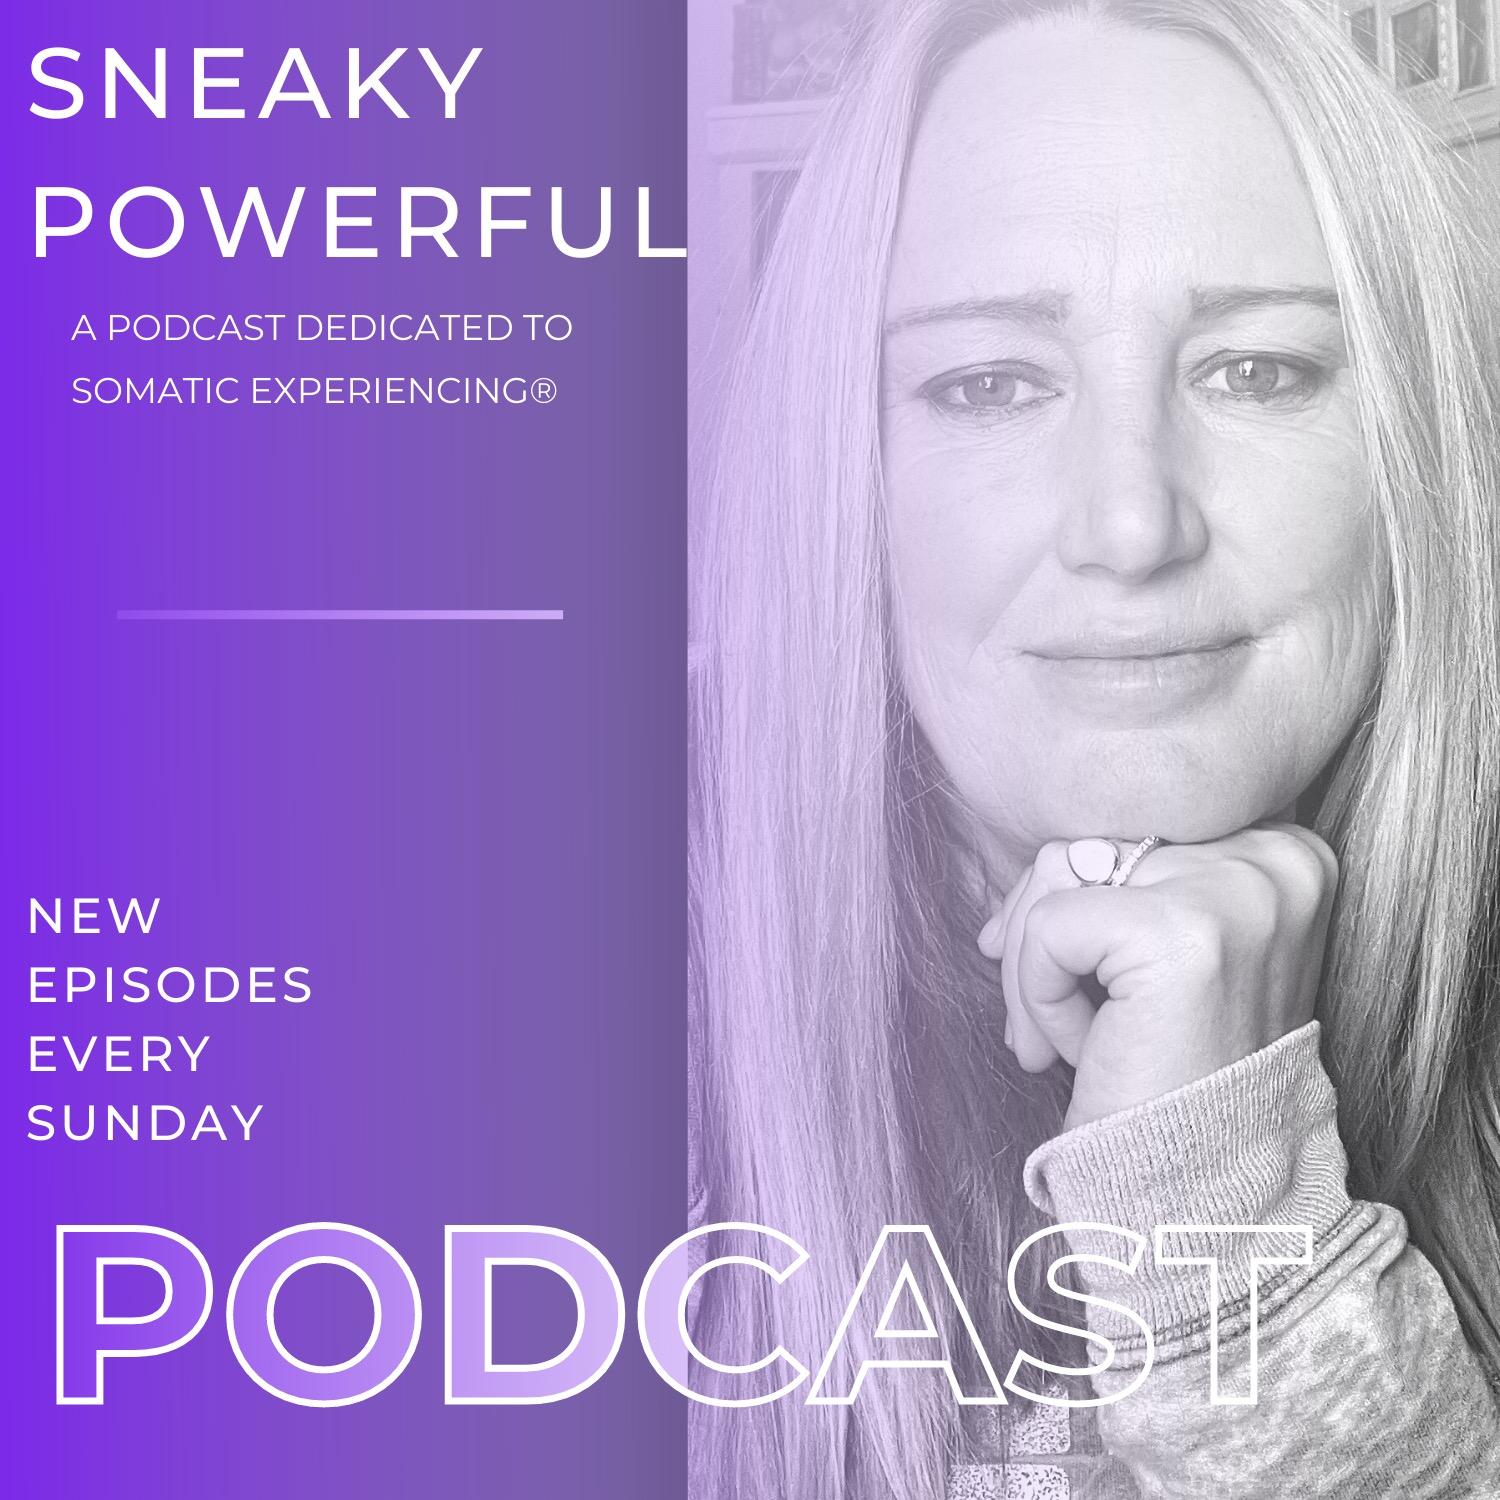 Sneaky Powerful - Hard and Sometimes Hilarious Stories of Healing through the lens of Somatic Experiencing®